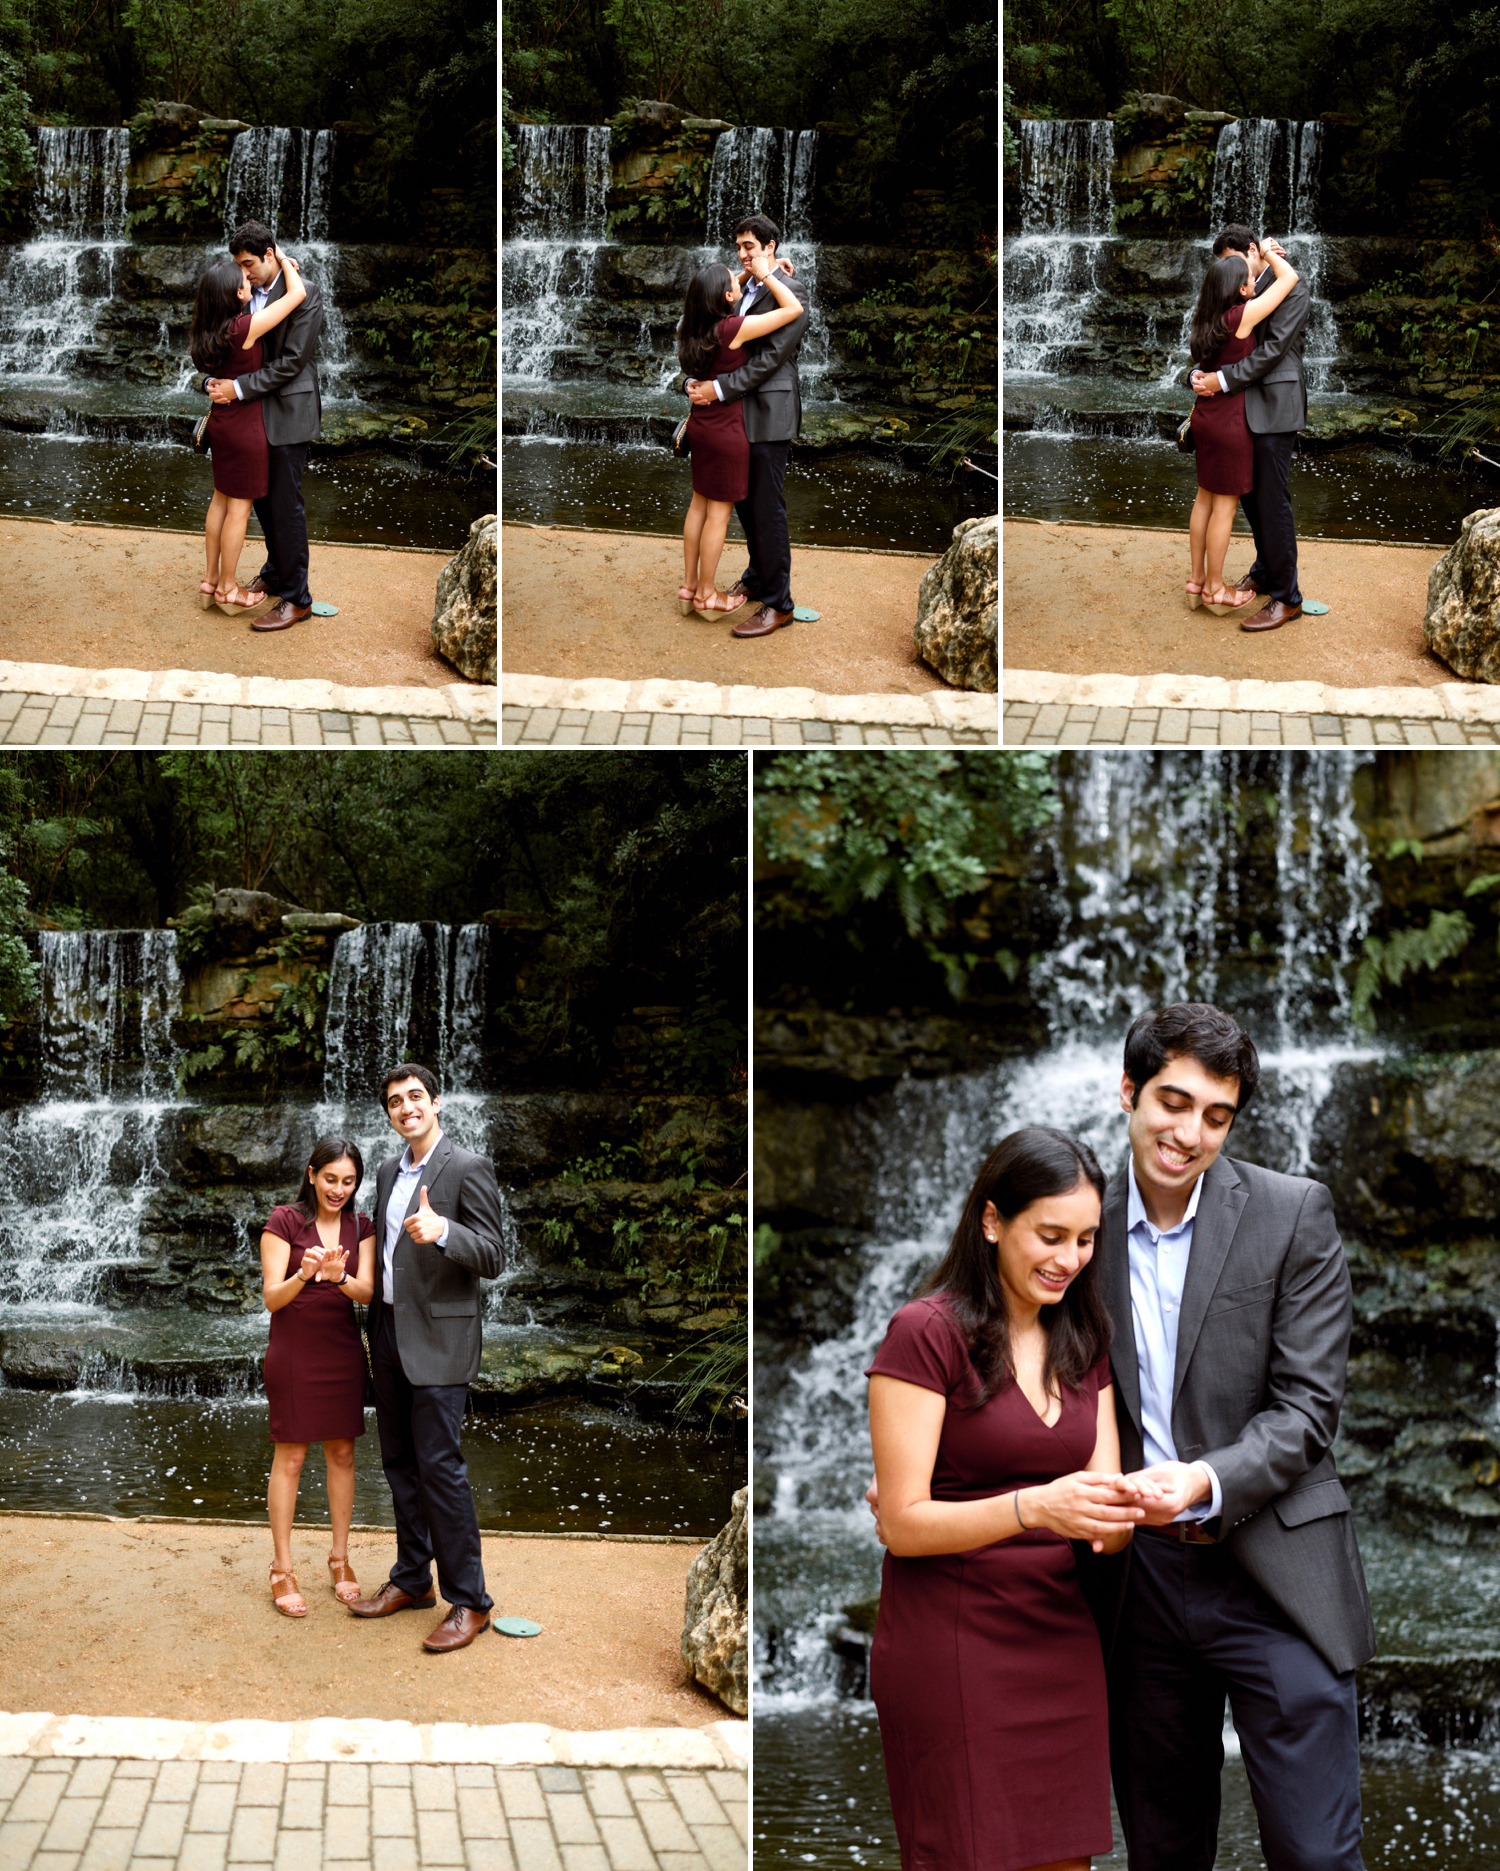 Katyayani's reactions to Pratik's proposal were just precious! We were thrilled to be able to capture thee for them - Austin wedding photographers Mercedes Morgan Photography